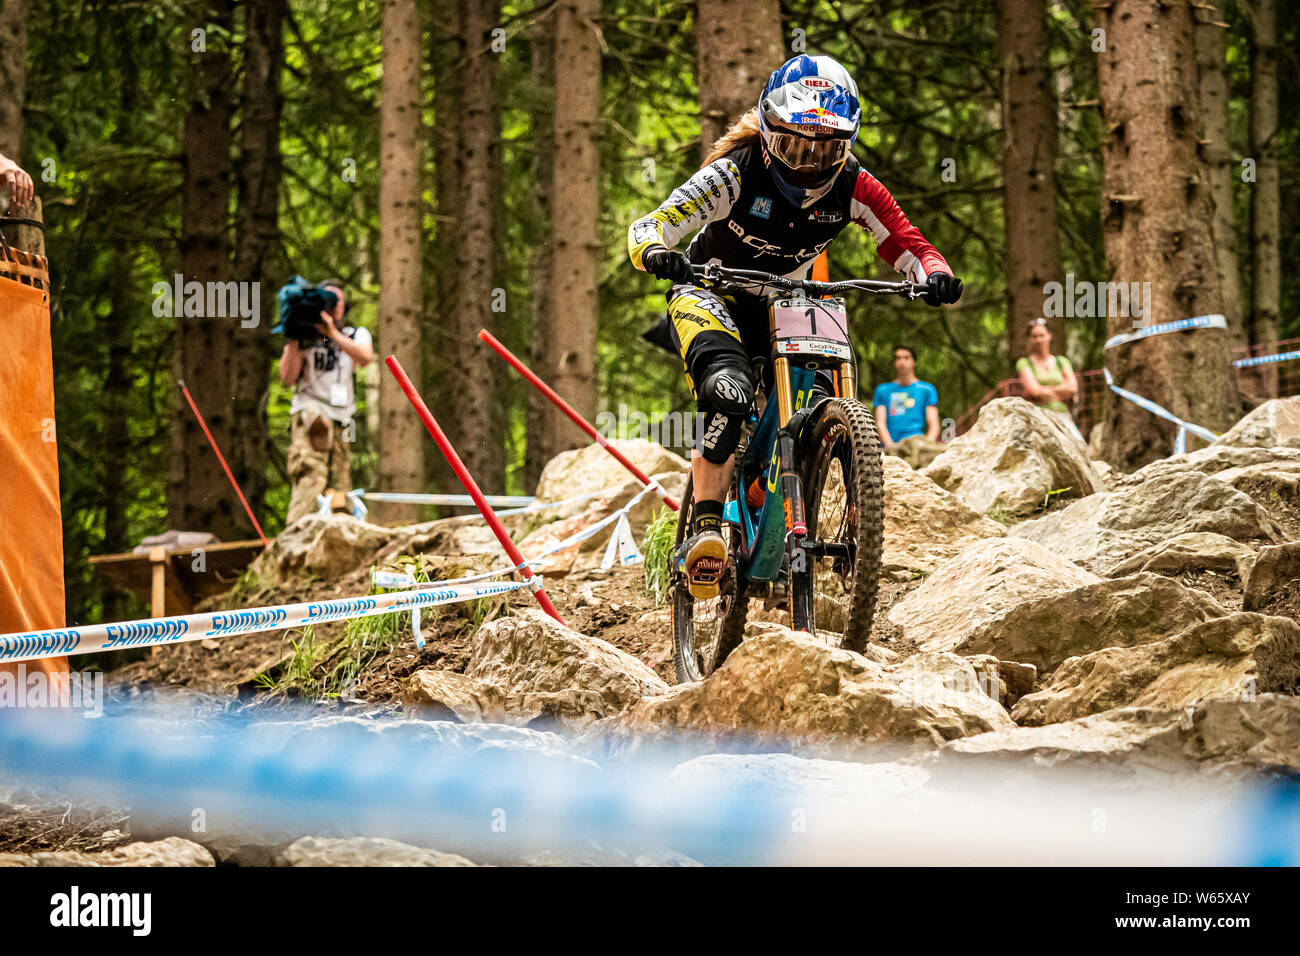 Rachel Atherton (GBR) racing at the UCI Mountain Bike Downhill World Cup. Wearing leaders jersey. Stock Photo